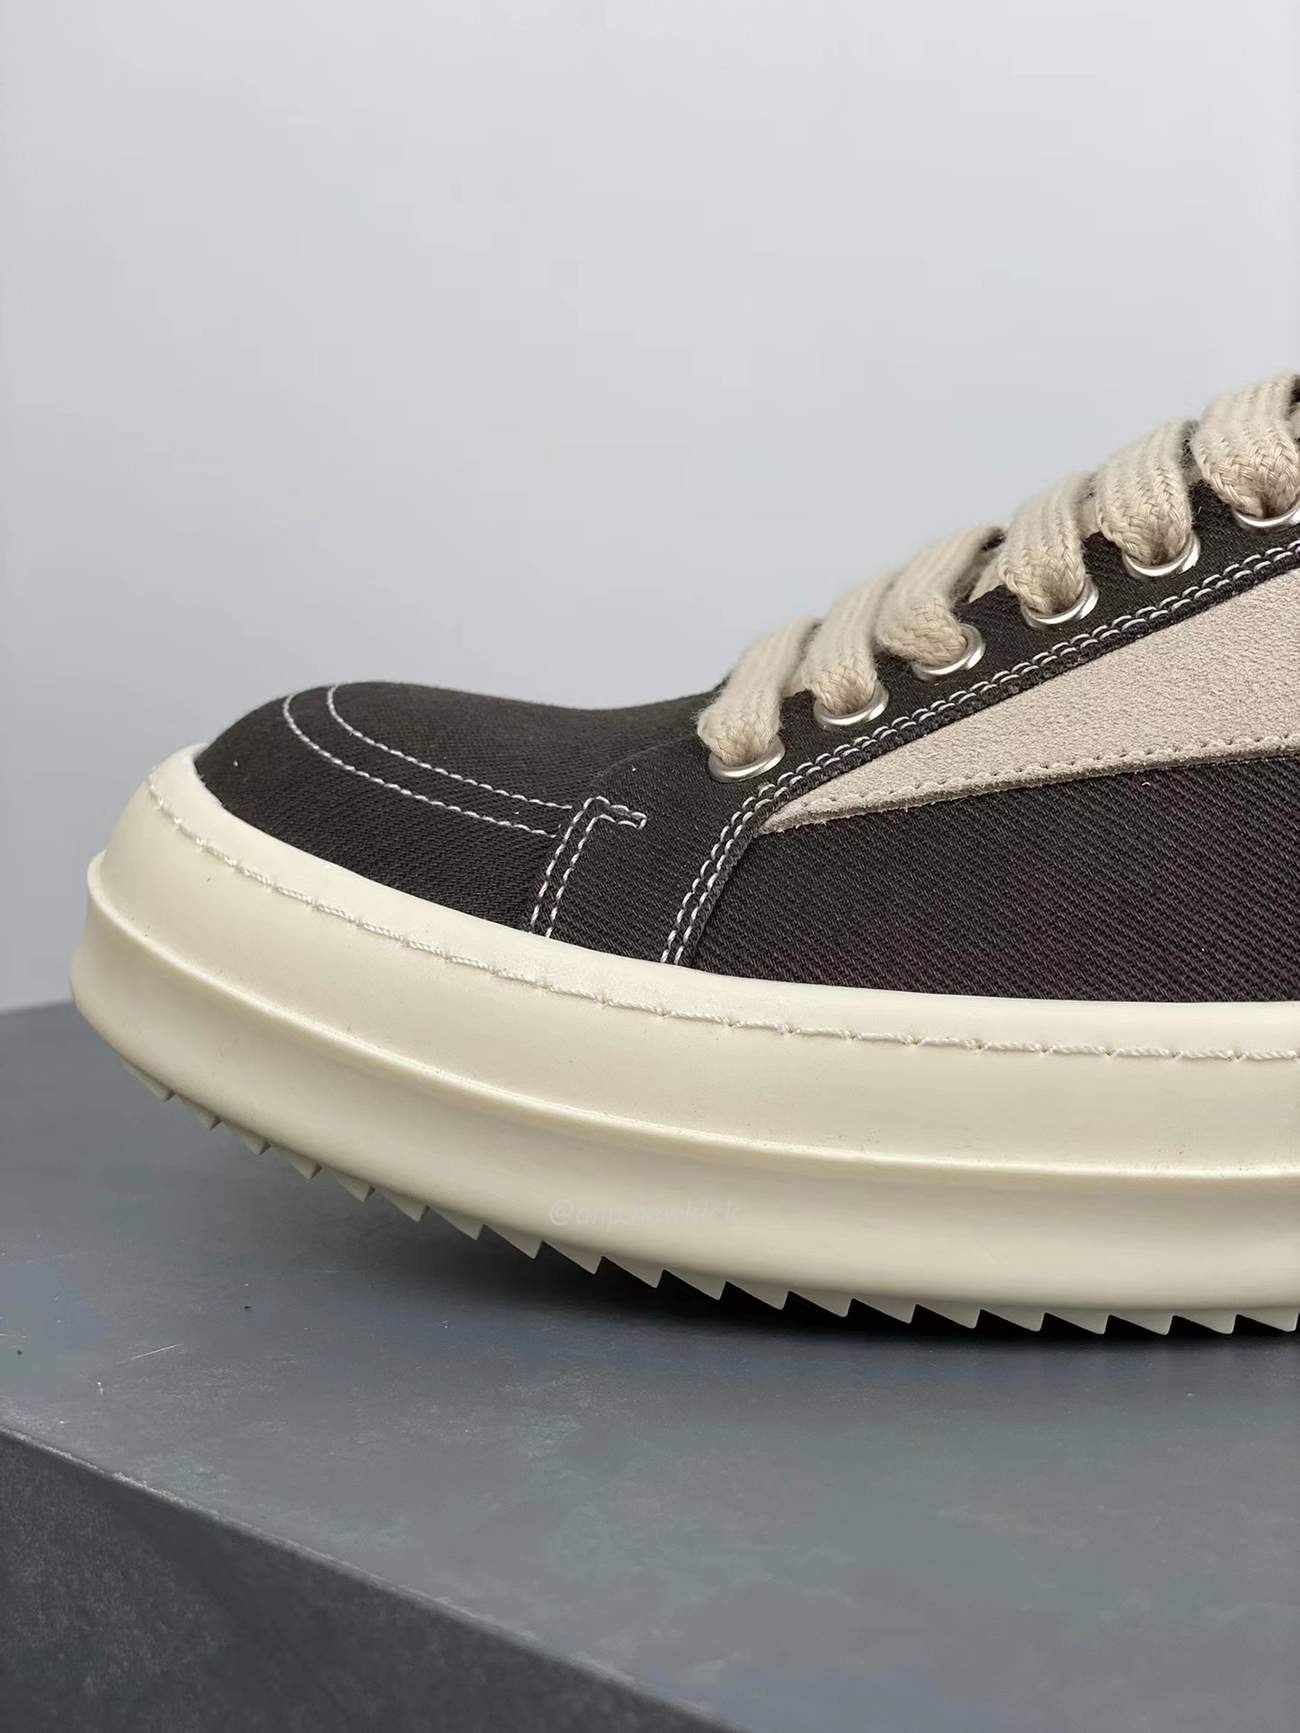 Rick Owens Leather Low Top Vintage Sneakers Suede Canvas Black Taupe Grey Faded Pnk Pearl Milk Dark Dust (29) - newkick.org